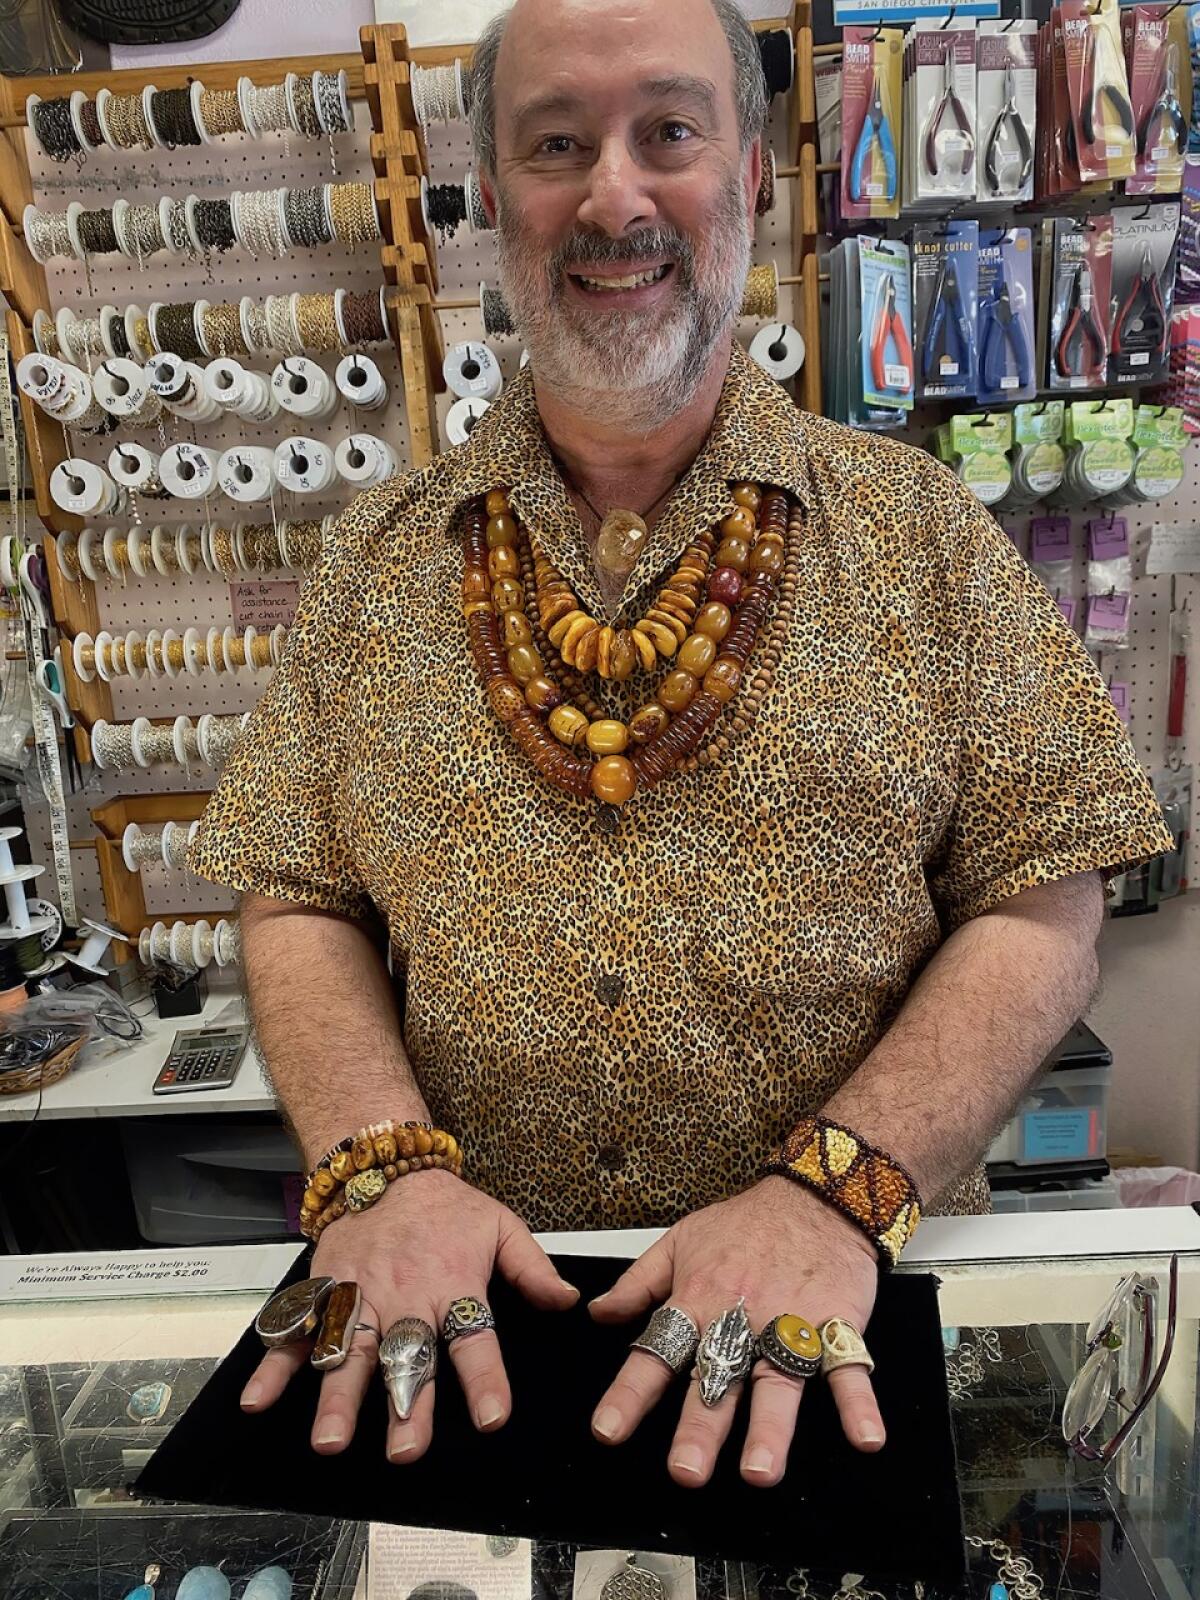 Phil Fischman, behind the counter at Beads, Crystals and More, wearing some of his favorite pieces.